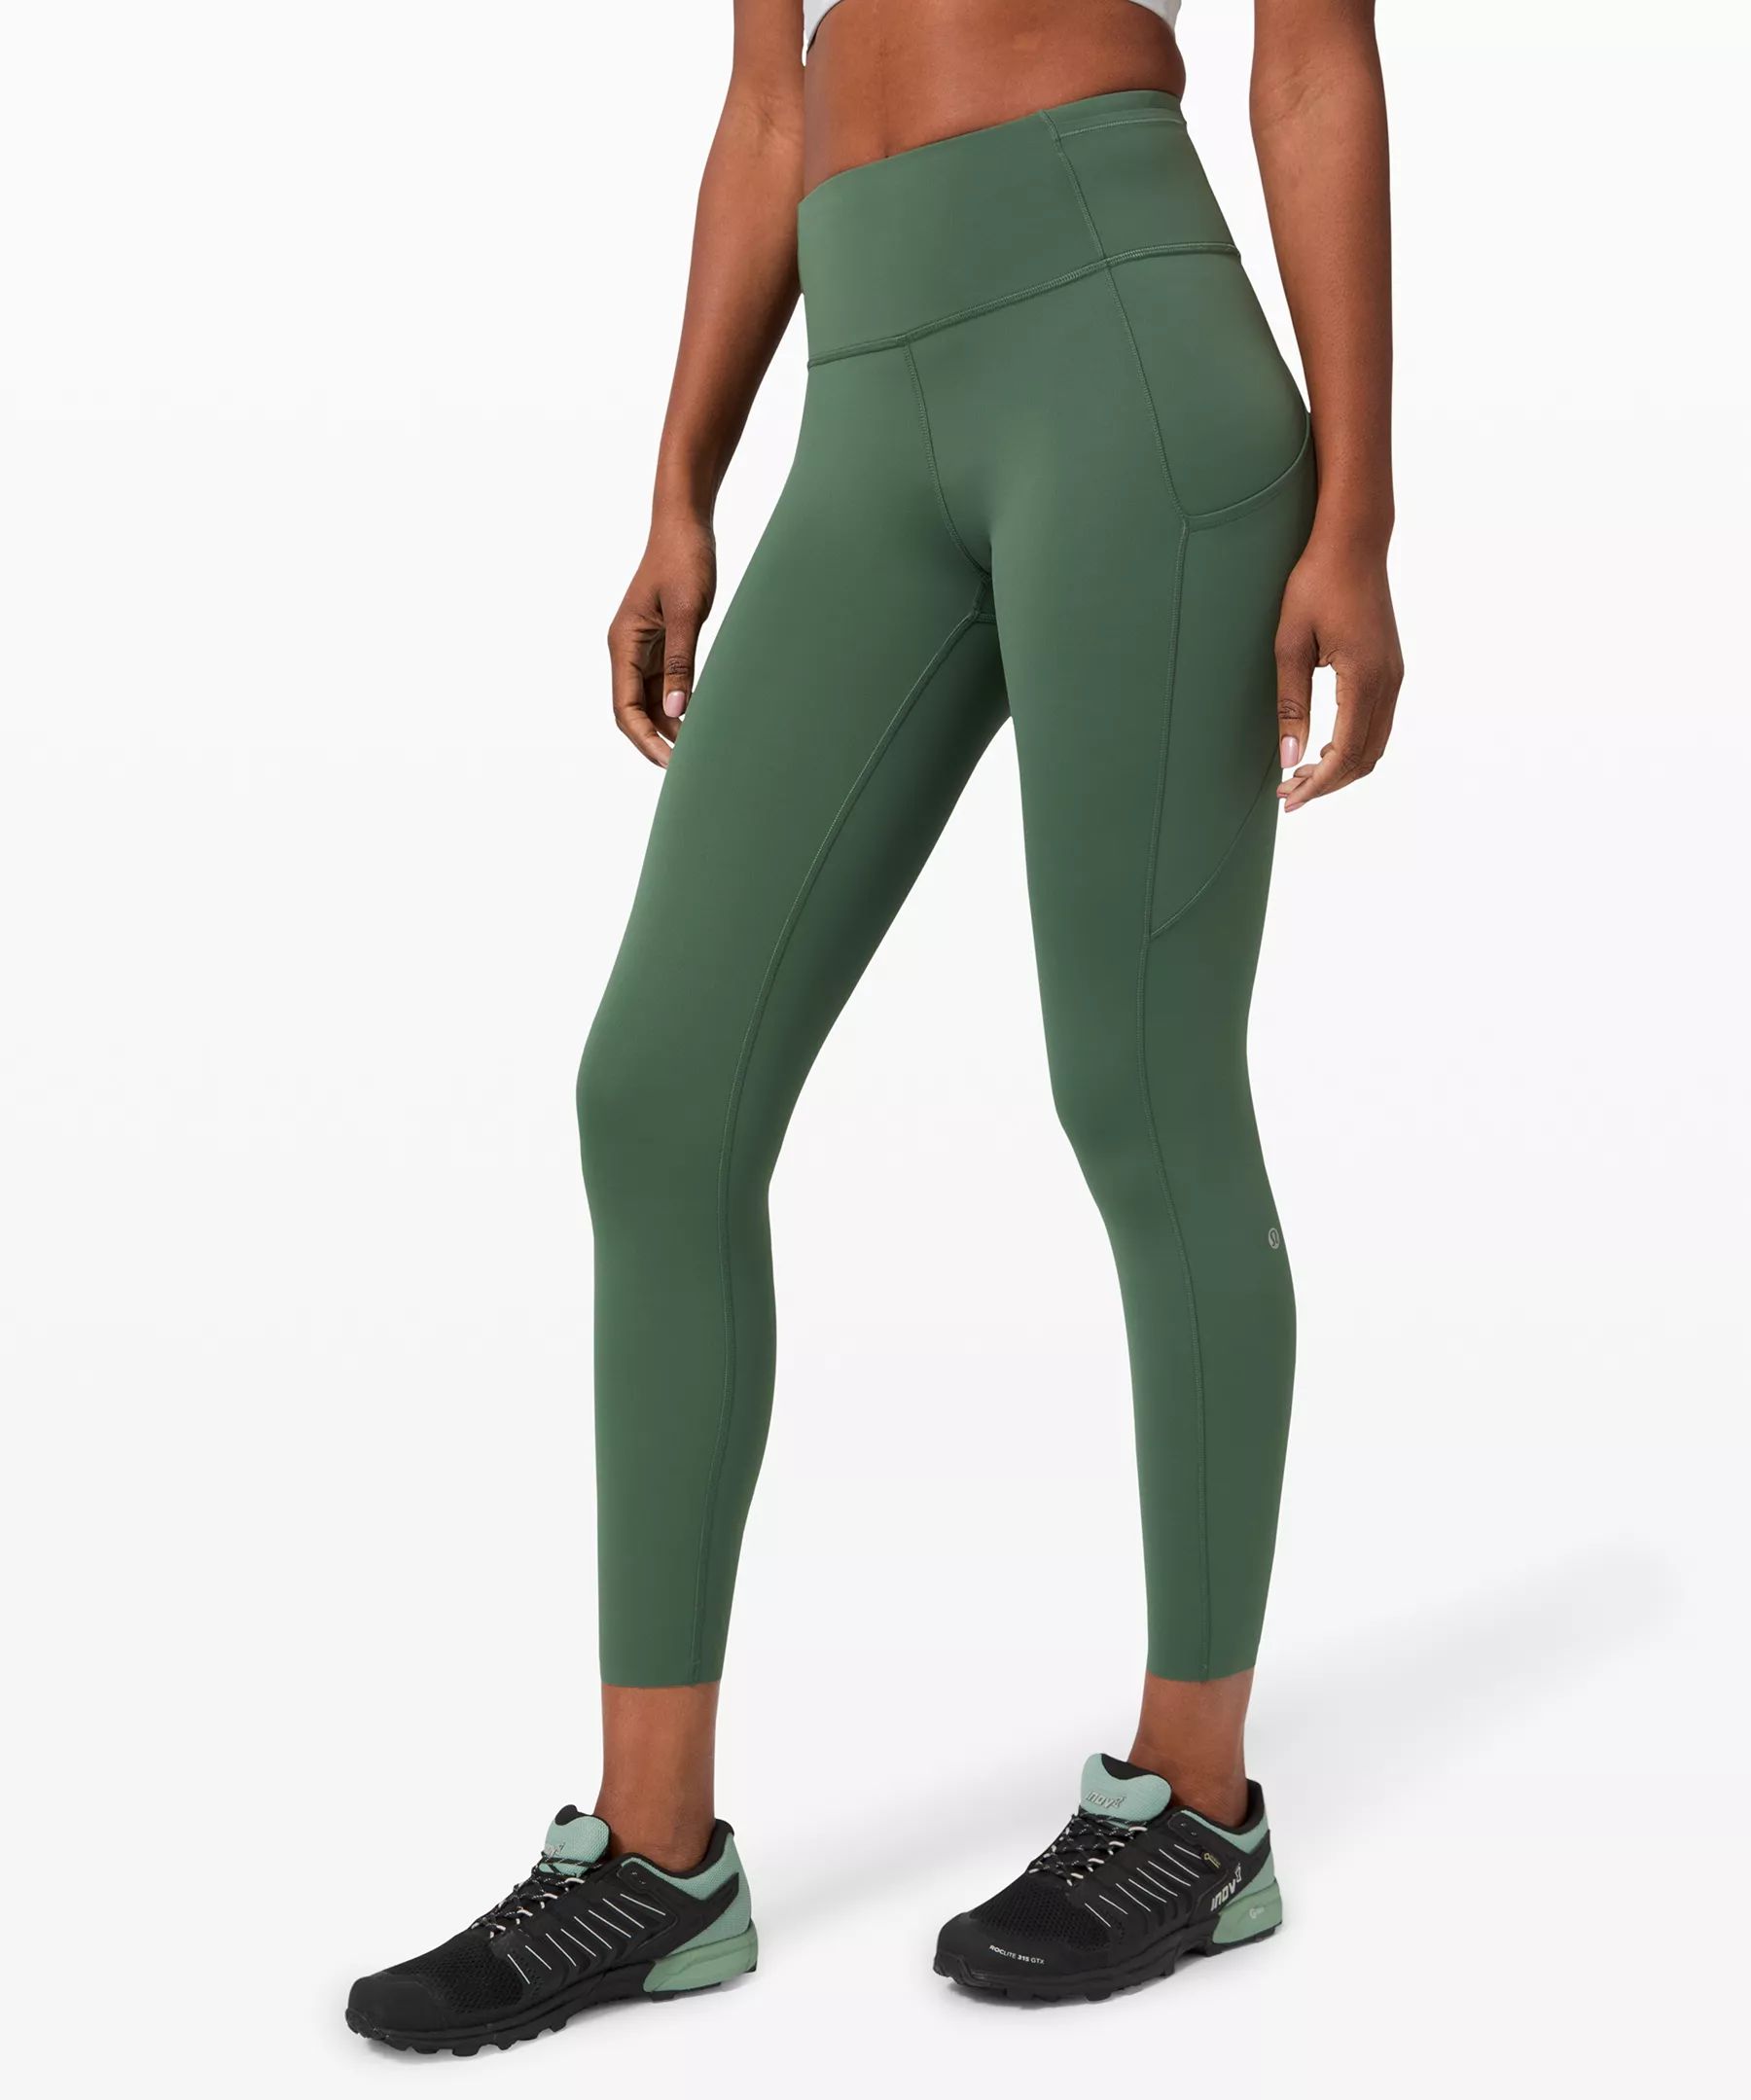 Fast and Free Tight II 25" Non-Reflective Nulux | Lululemon (US)